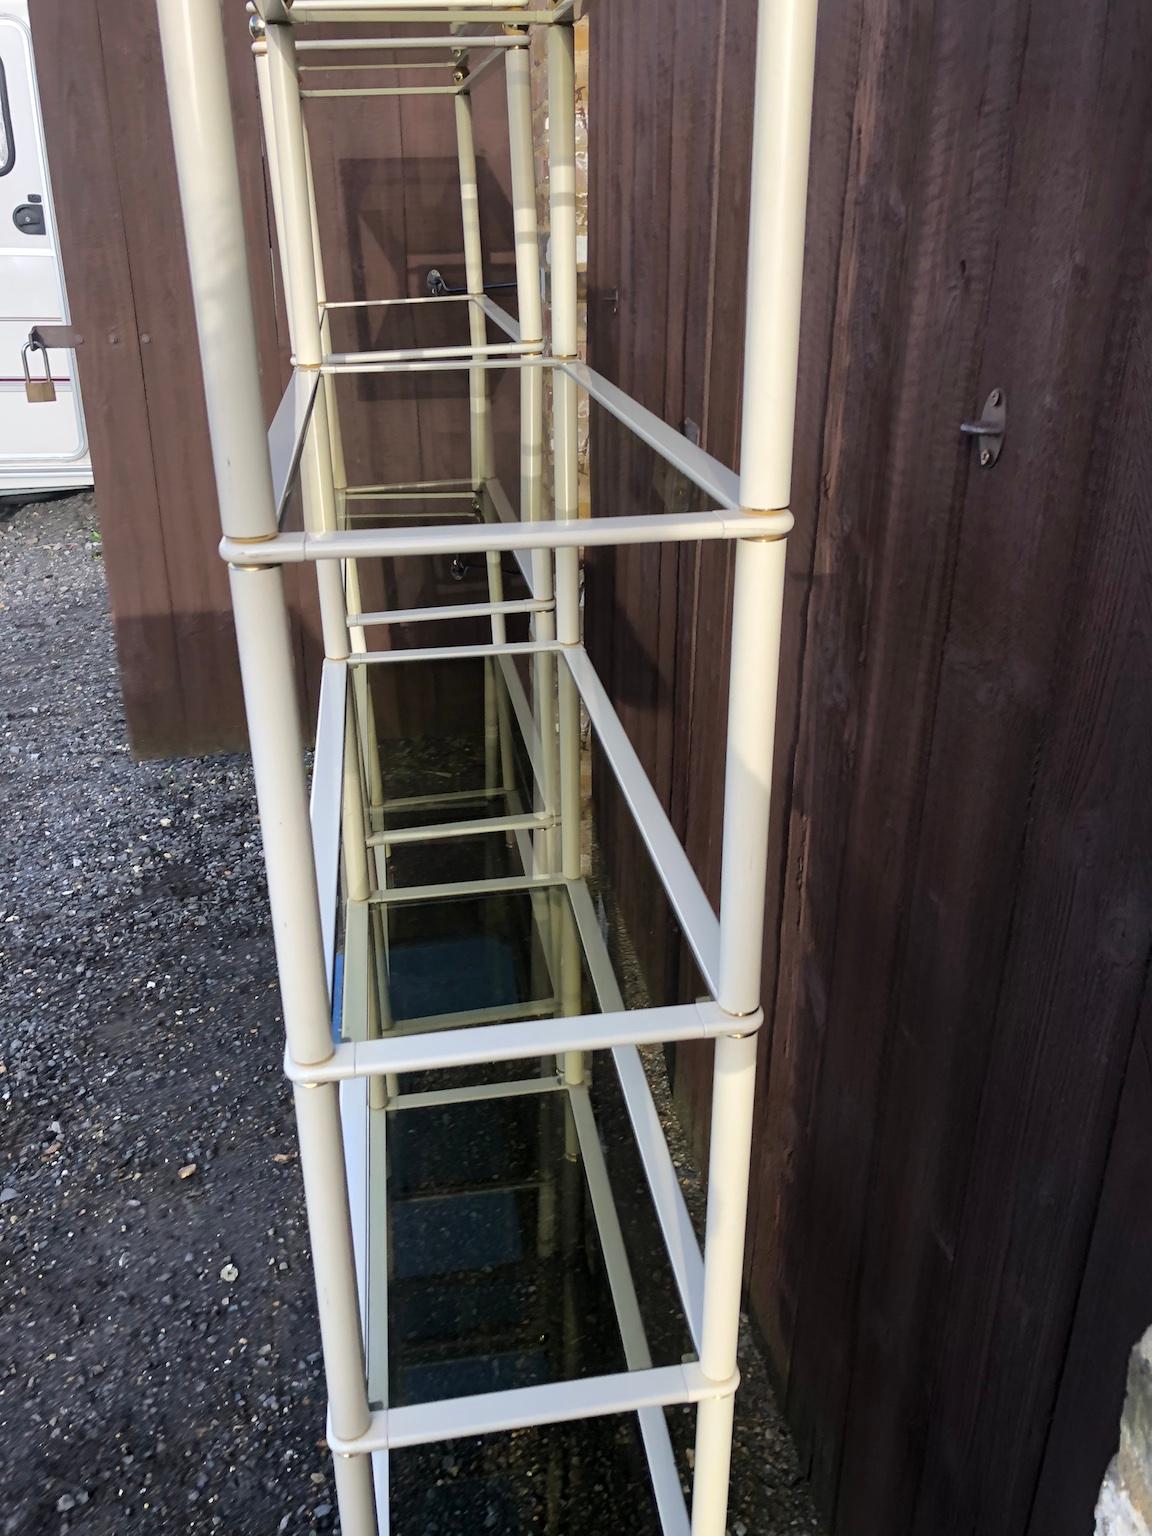 Midcentury Cream and Gold Metal Shelving Units, Italian, 1980s For Sale 4